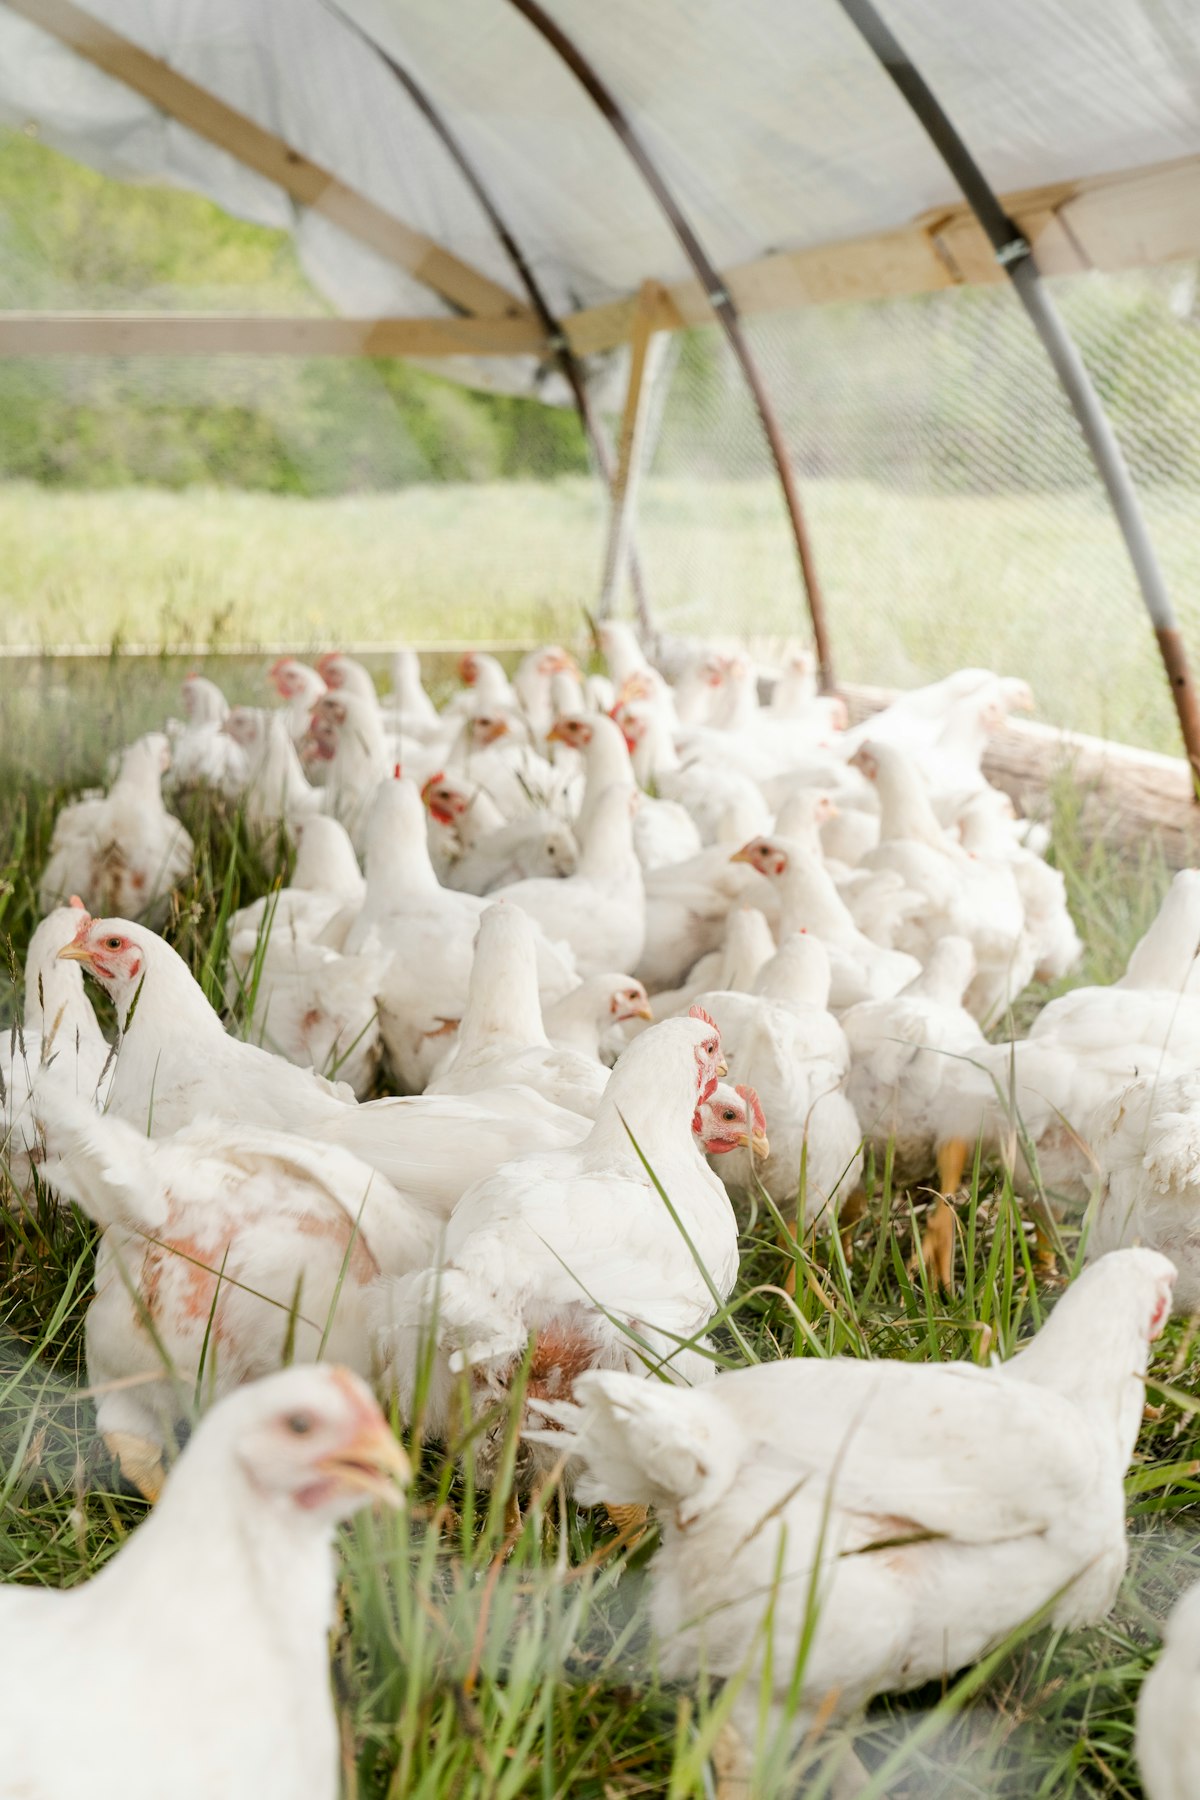 Start Your Poultry Business Right With Free Poultry Farming Business Plan Pdf!